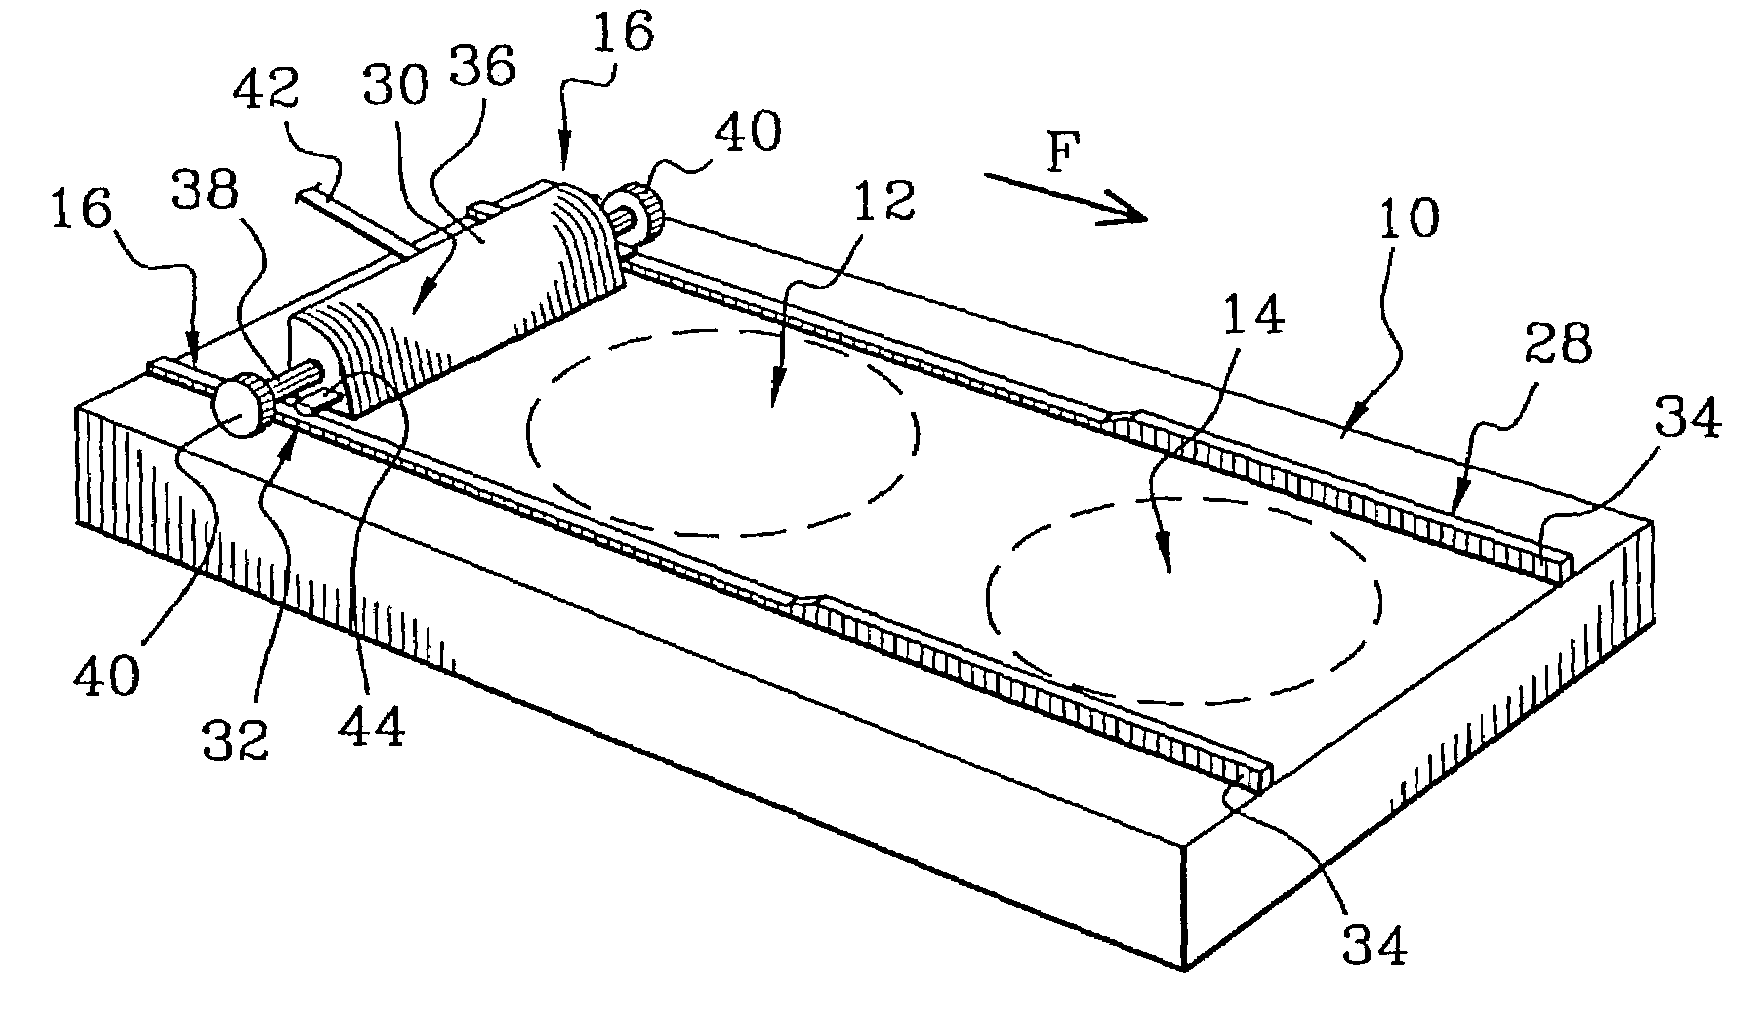 Device for applying thin layers of a powder or pulverulent material and corresponding method